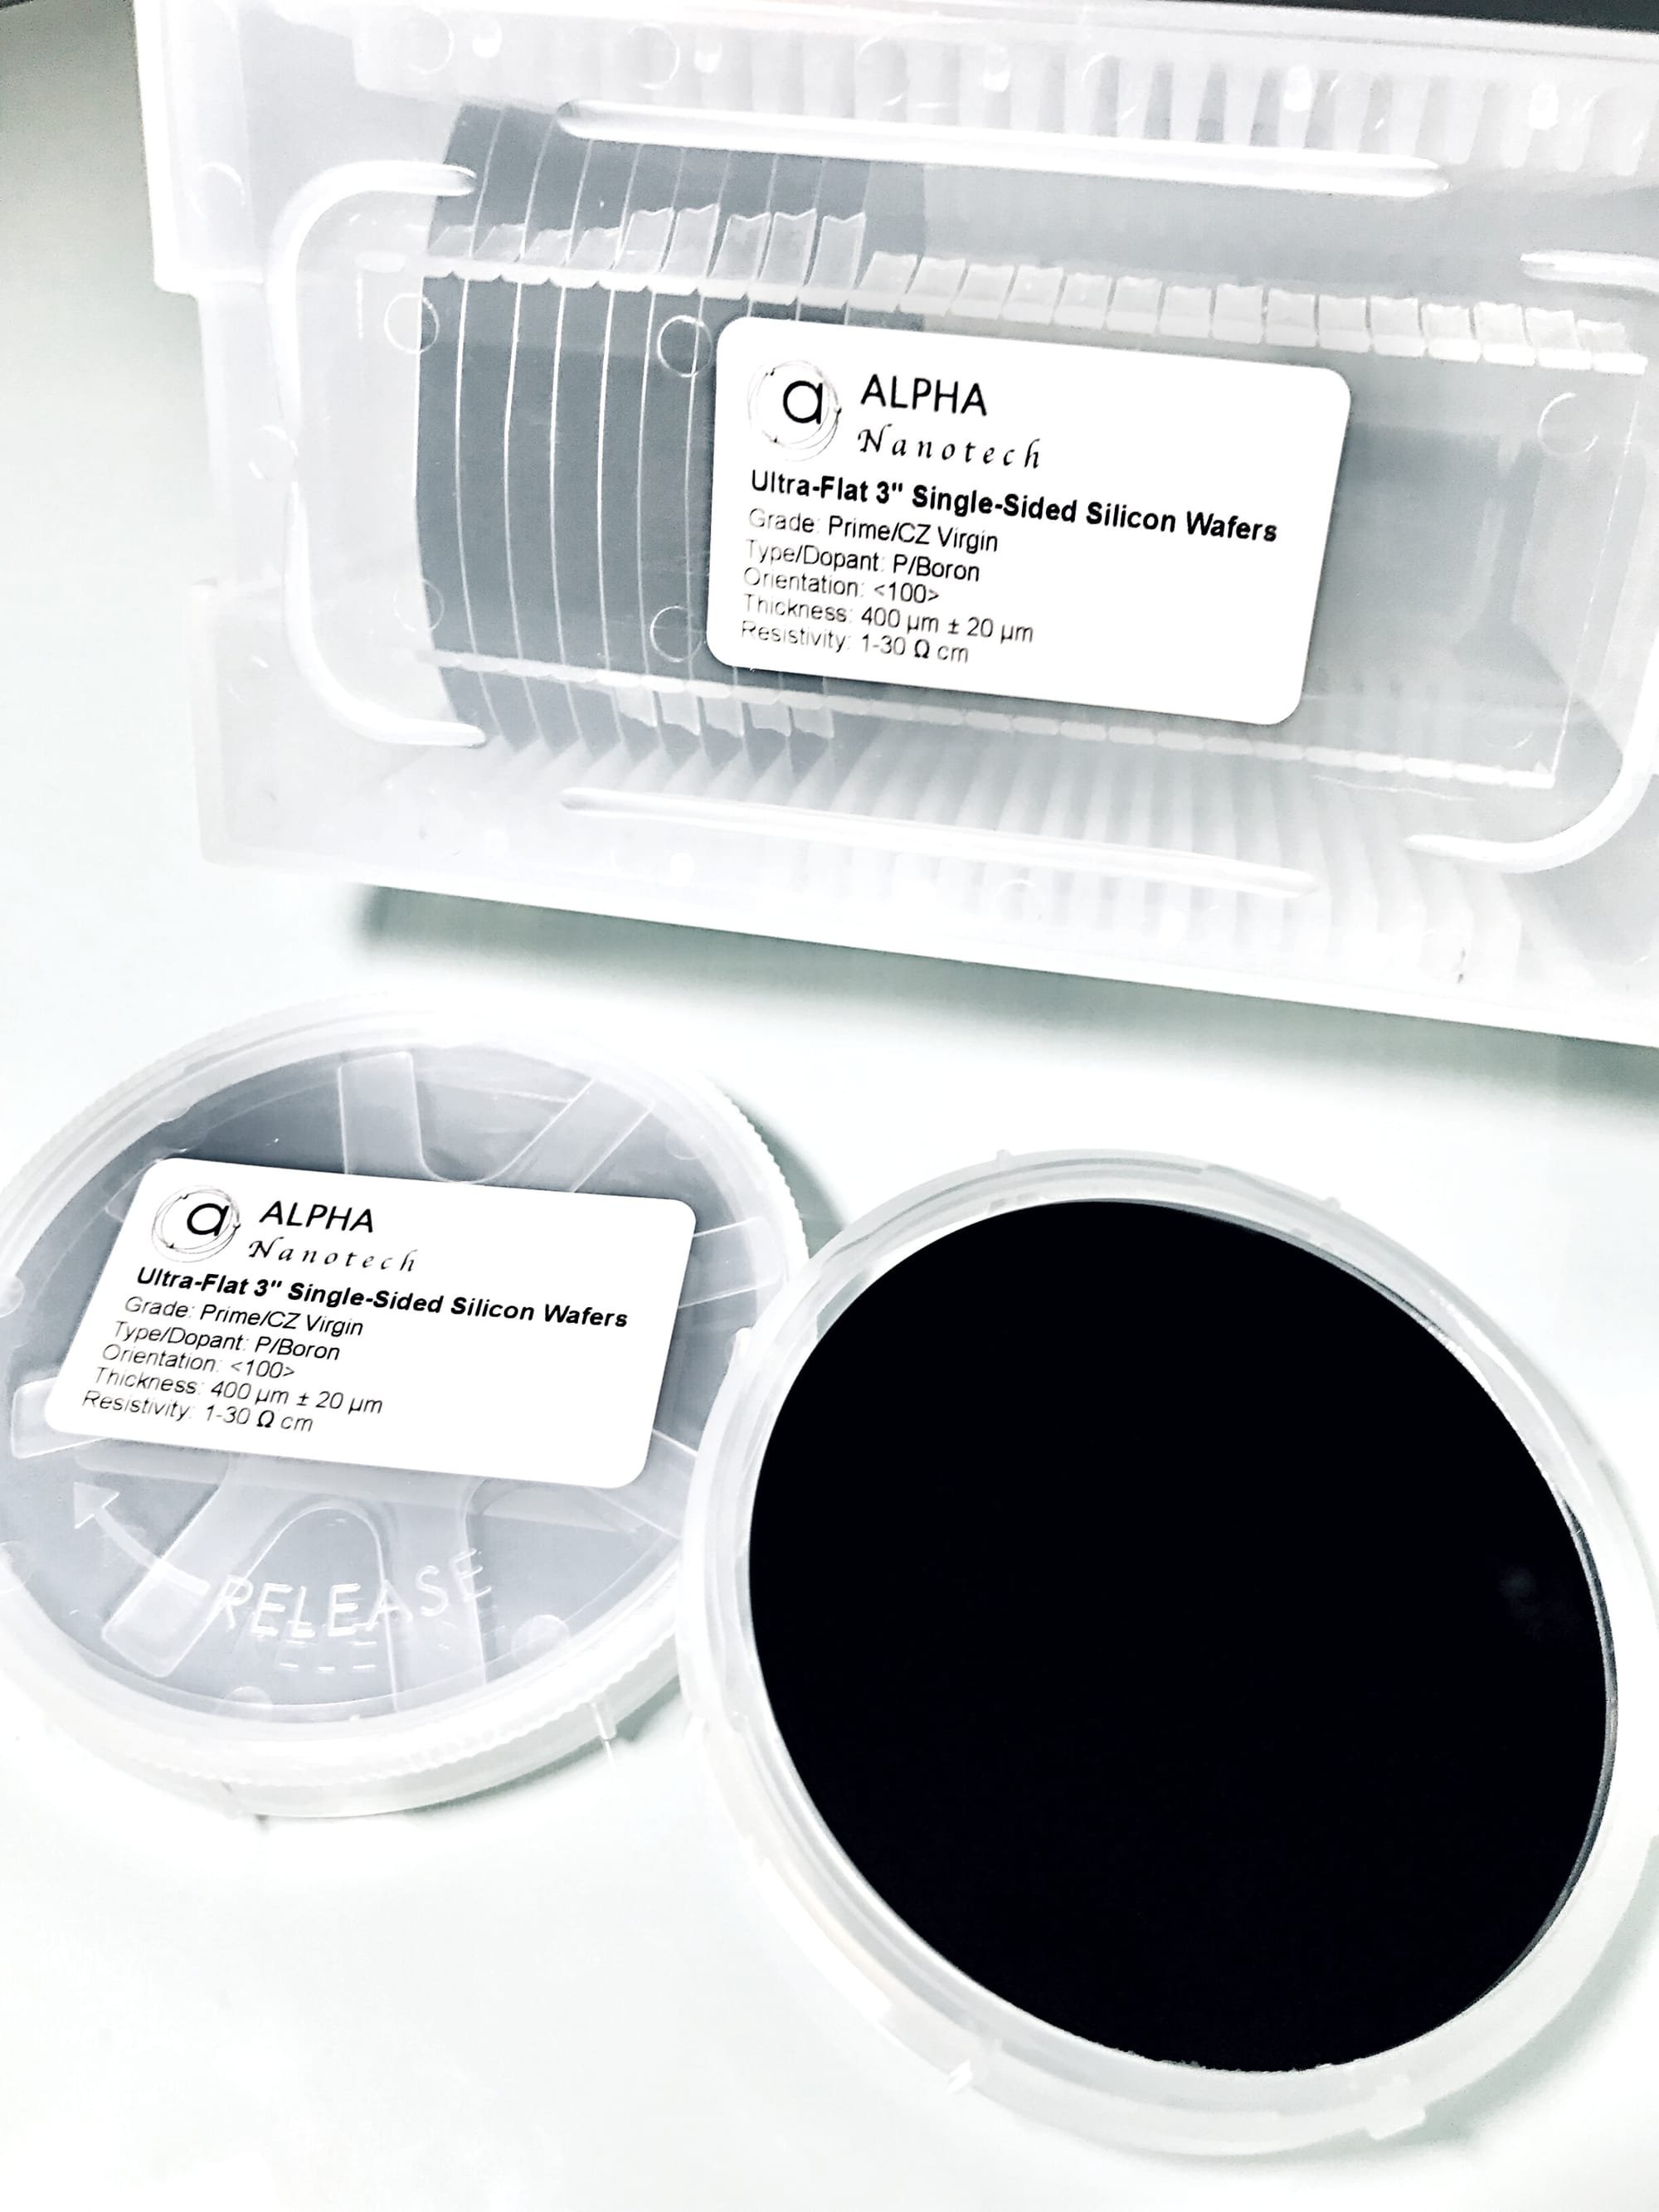 P-Type Boron-Doped 200nm Sio2 Thermal Oxide Wafer – Where To Get